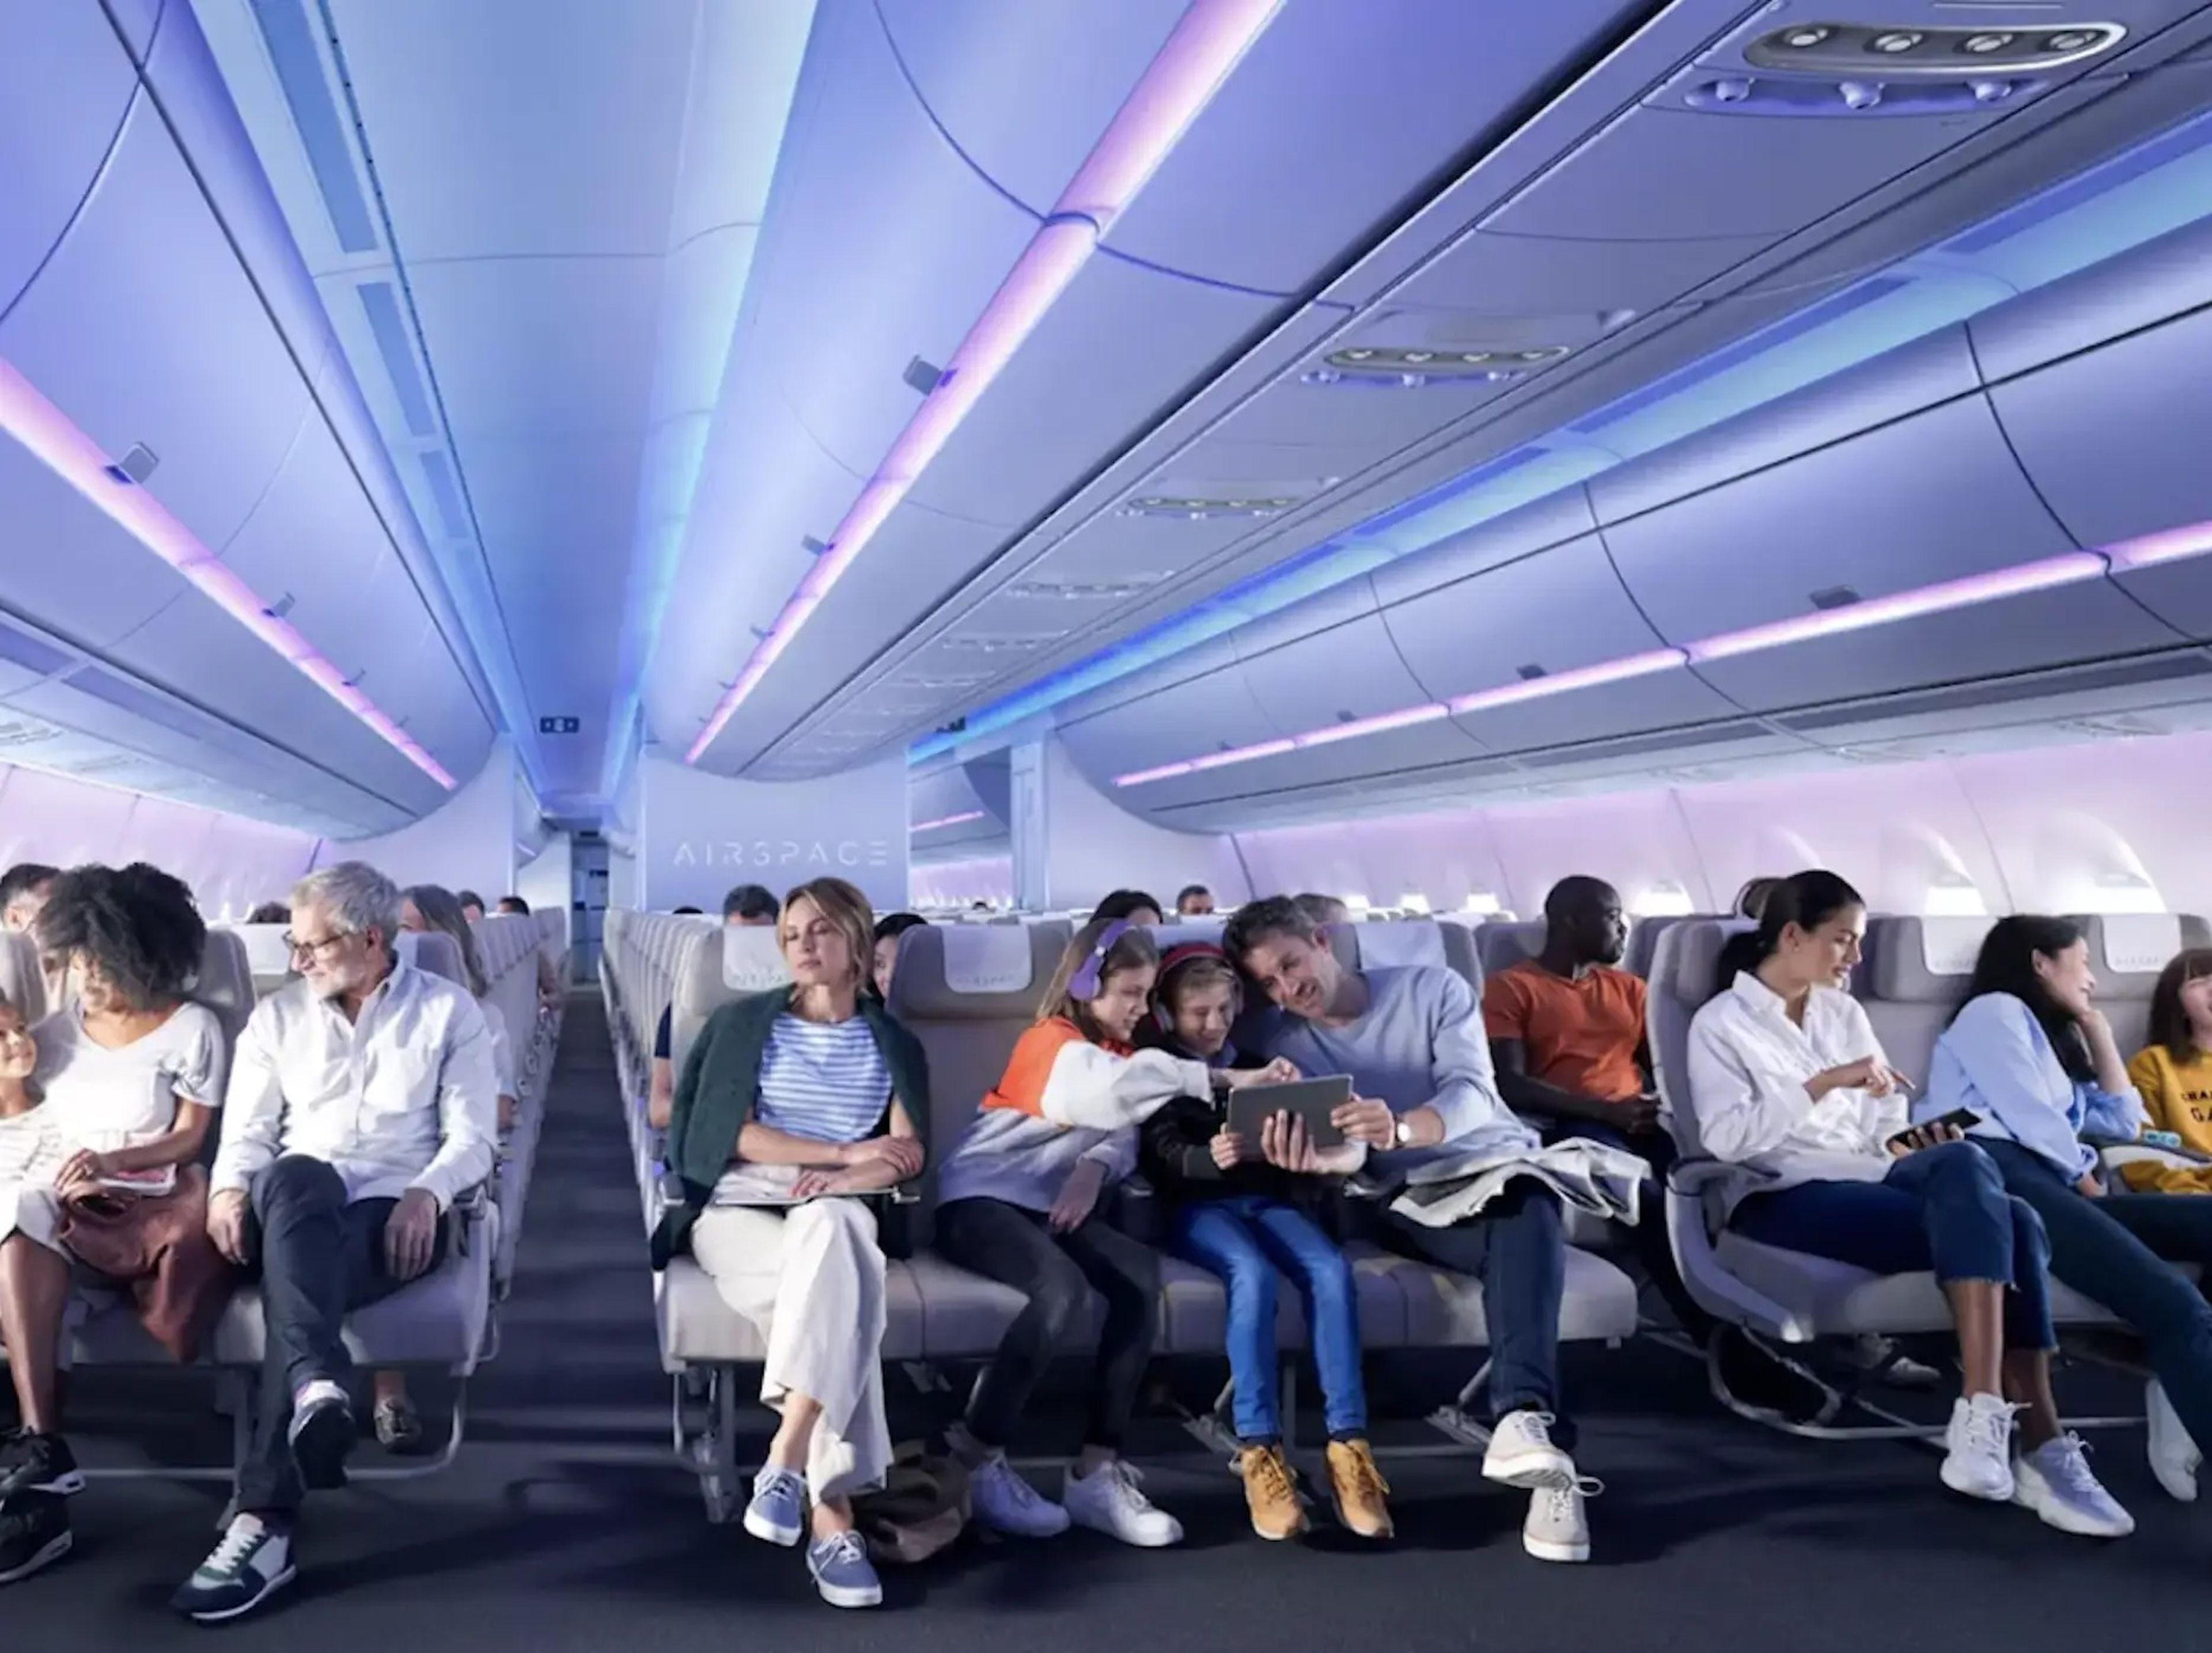 Airbus' 10-abreast seat layout.